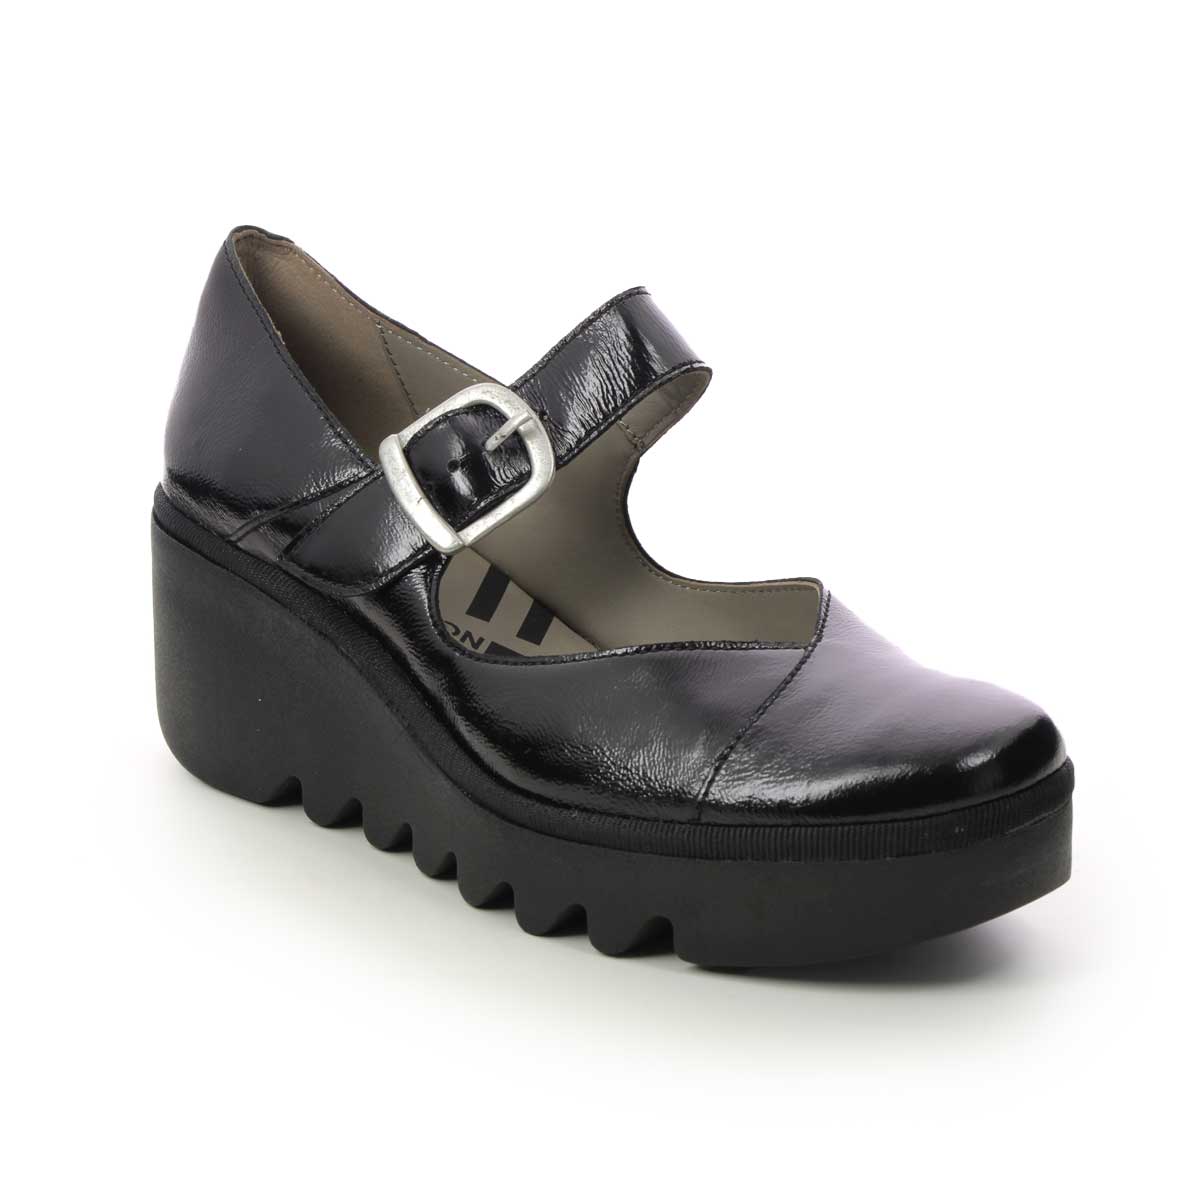 Fly London Baxe   Blu Lmj Black Patent Womens Wedge Shoes P501428 In Size 37 In Plain Black Patent